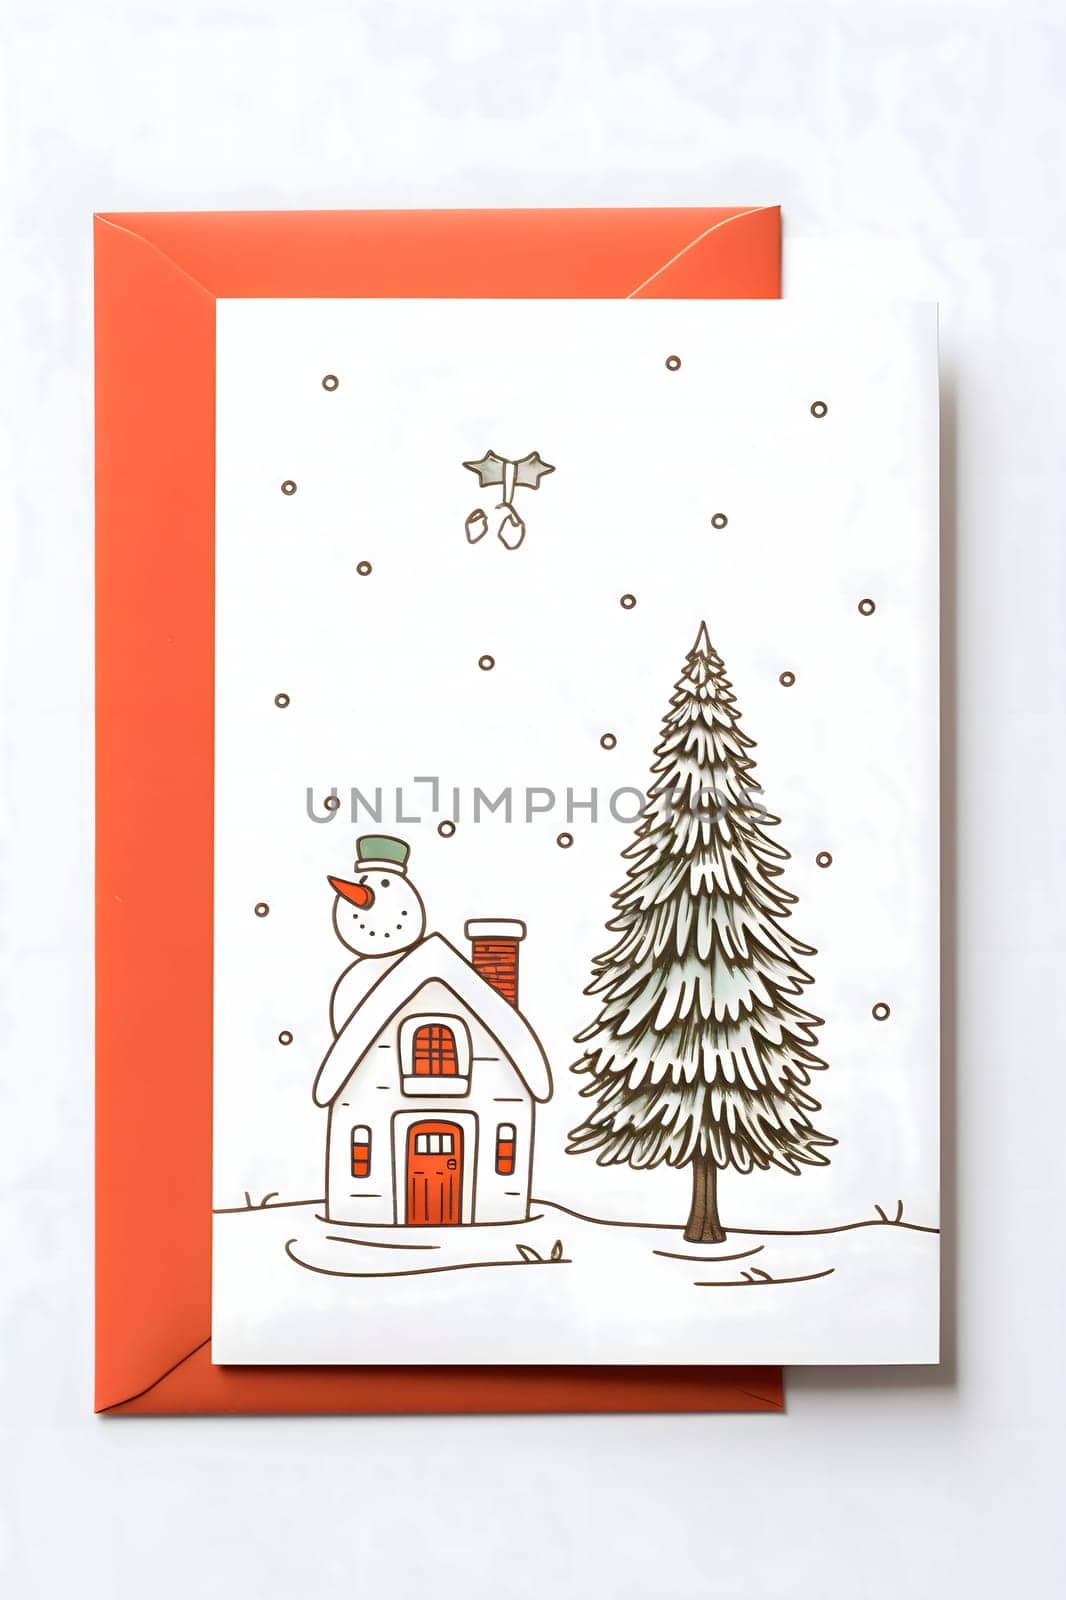 Drawn Christmas tree, snowman and house on a white card. Christmas card as a symbol of remembrance of the birth of the savior. A Time of Joy and Celebration.